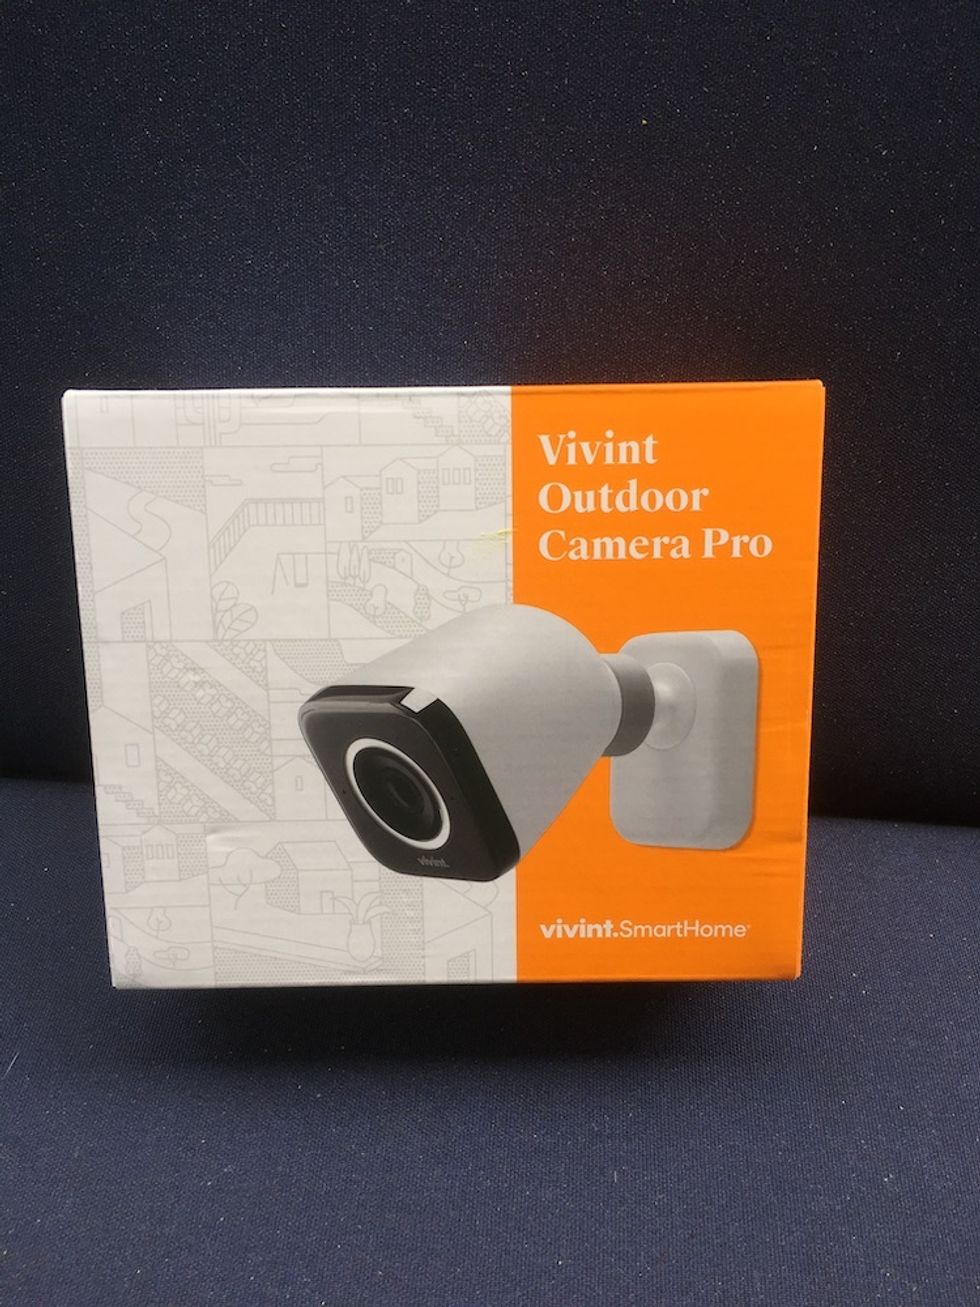 A Photo of the box for Vivint Outdoor Camera Pro